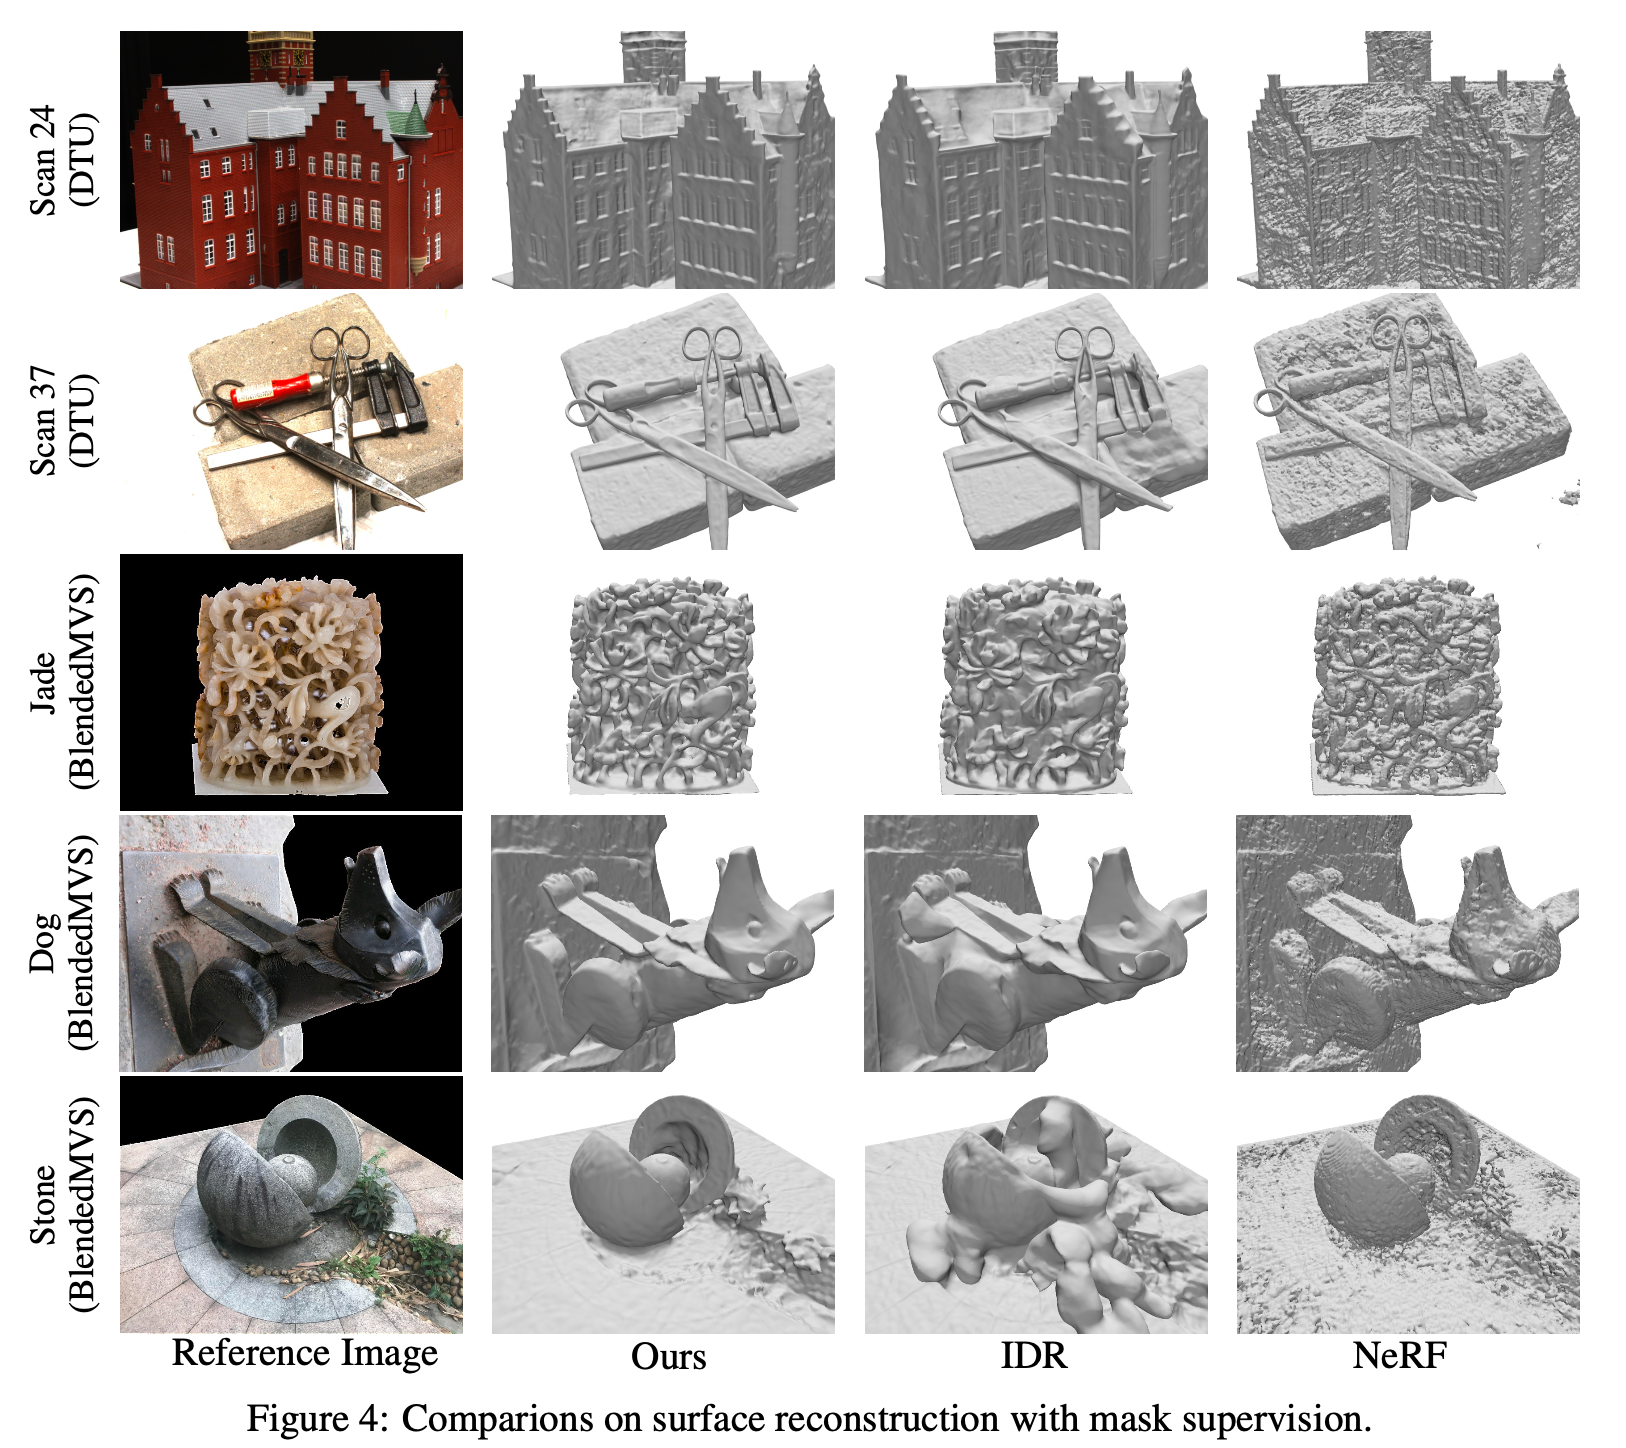 NeuS: Learning Neural Implicit Surfaces by Volume Rendering for Multi-view Reconstruction 论文笔记